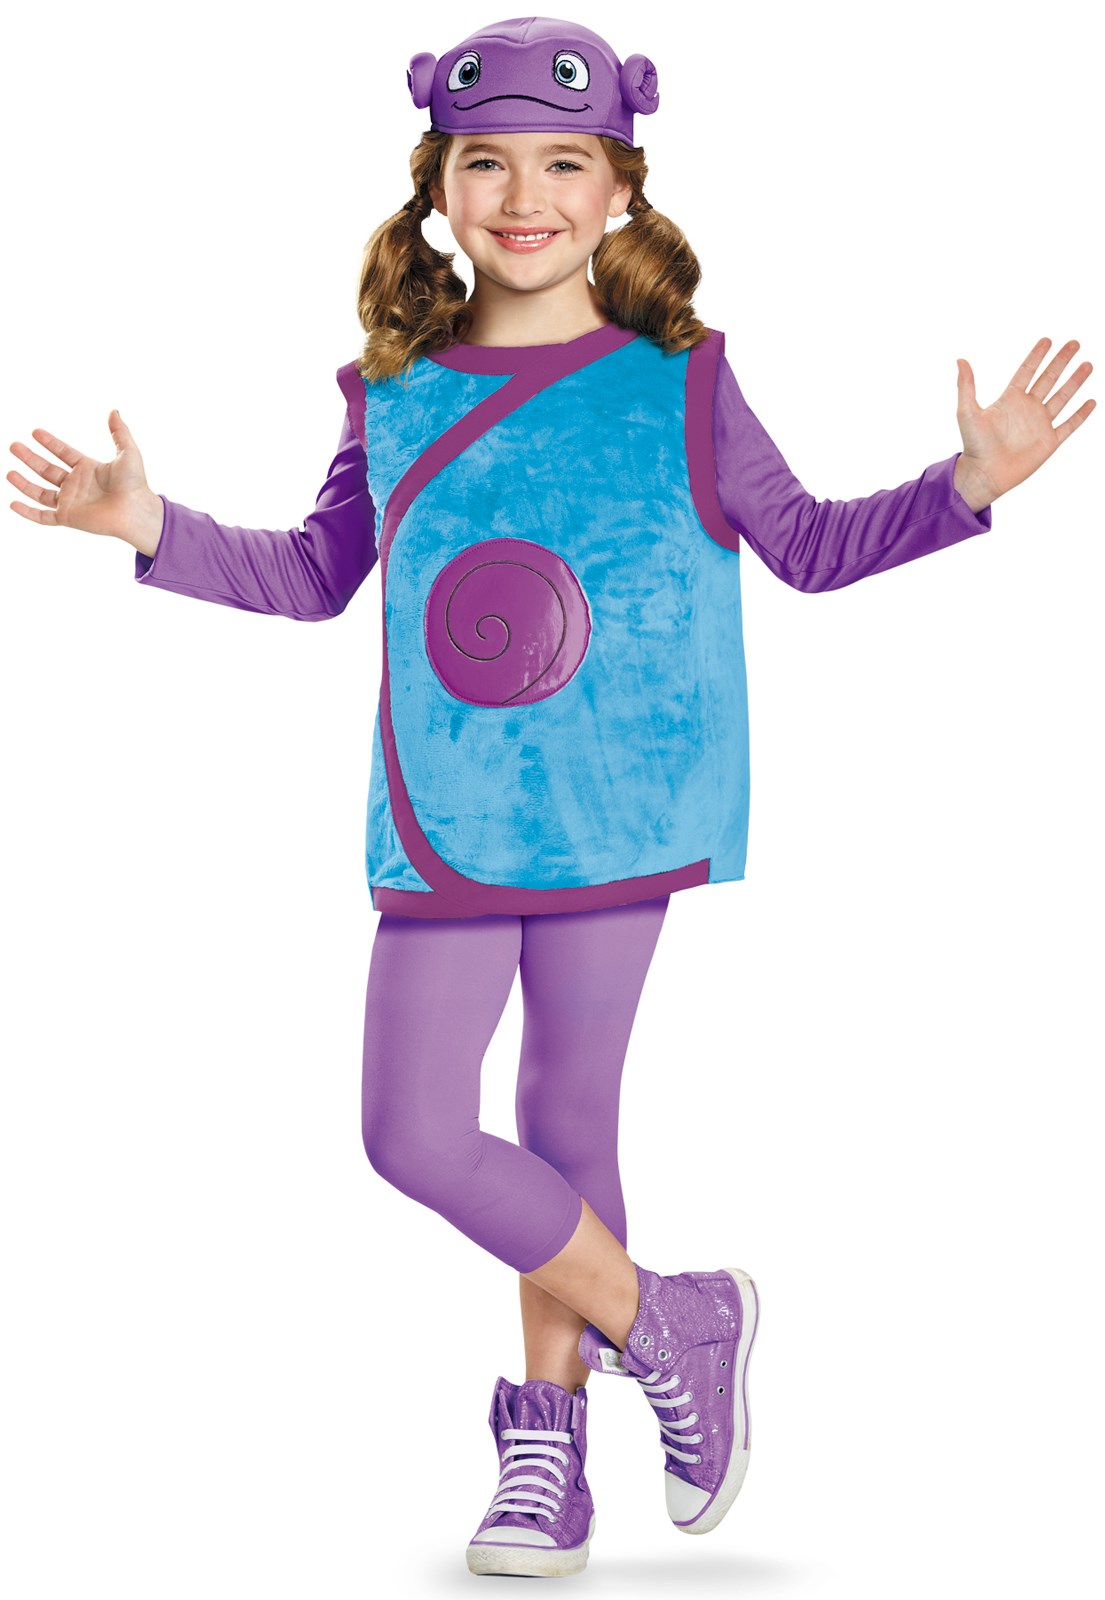 Dreamworks Home: Oh Deluxe Costume For Toddlers